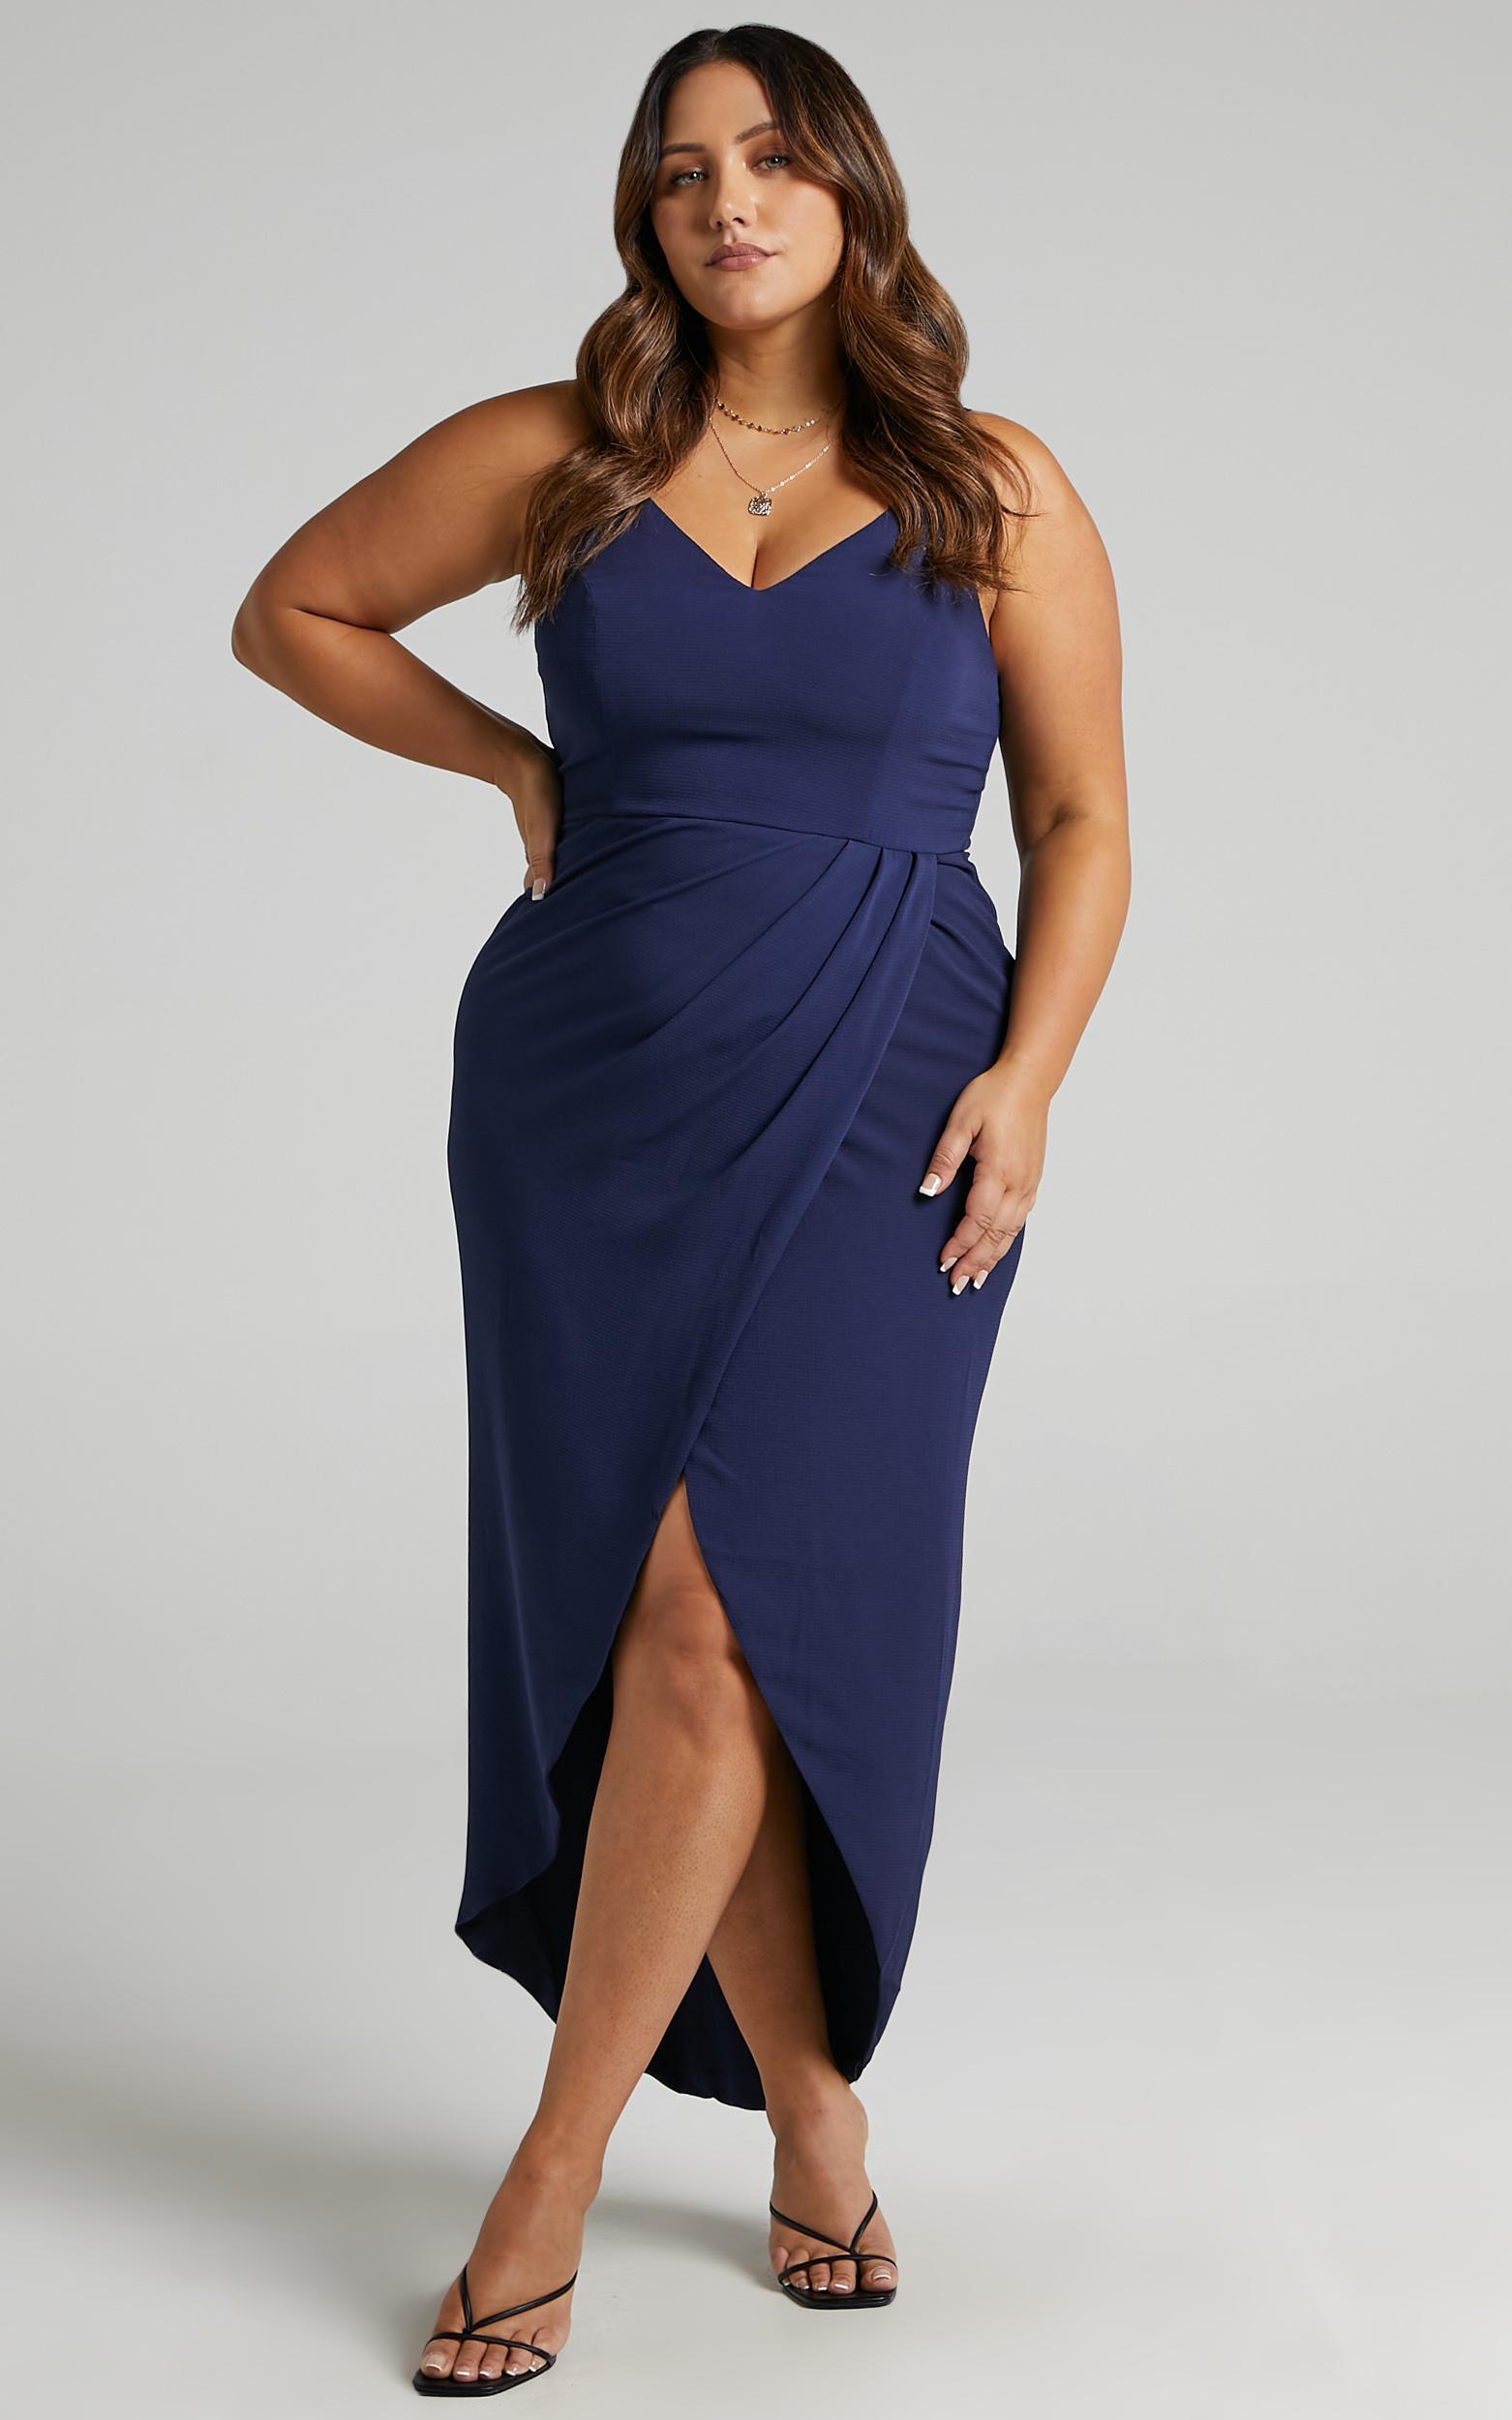 Lucky Day Drape Maxi Dress in Navy - 06, NVY7, hi-res image number null